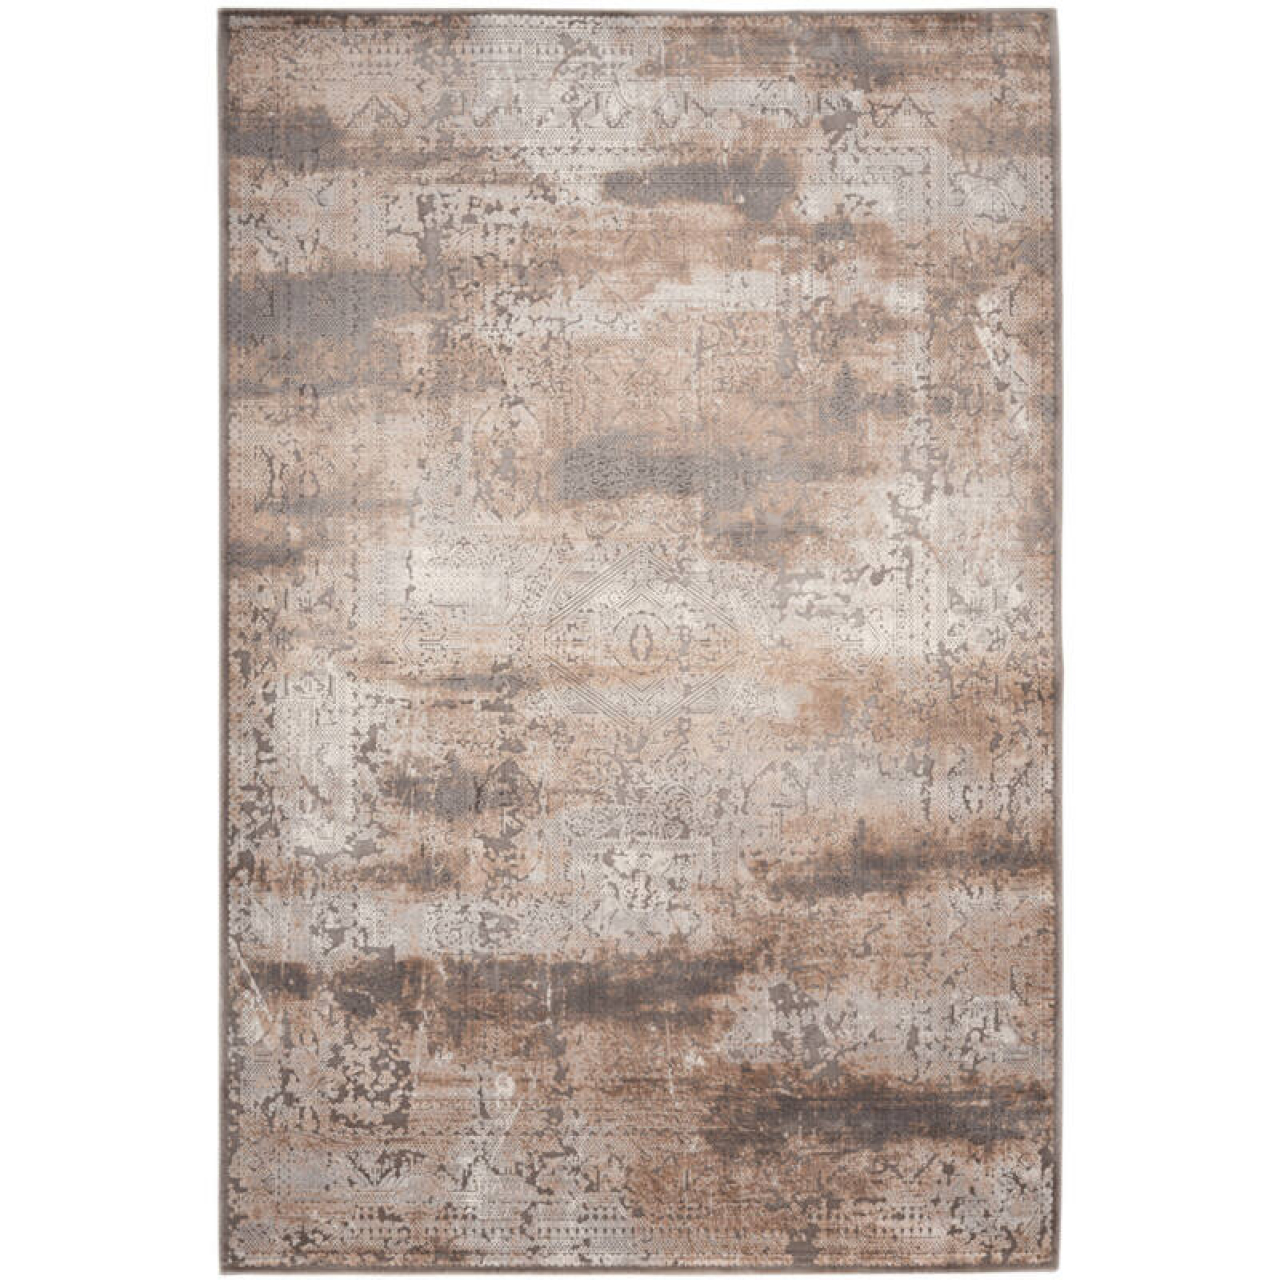 Obsession Haute Couture Jewel 950 Taupe szőnyeg-200x290